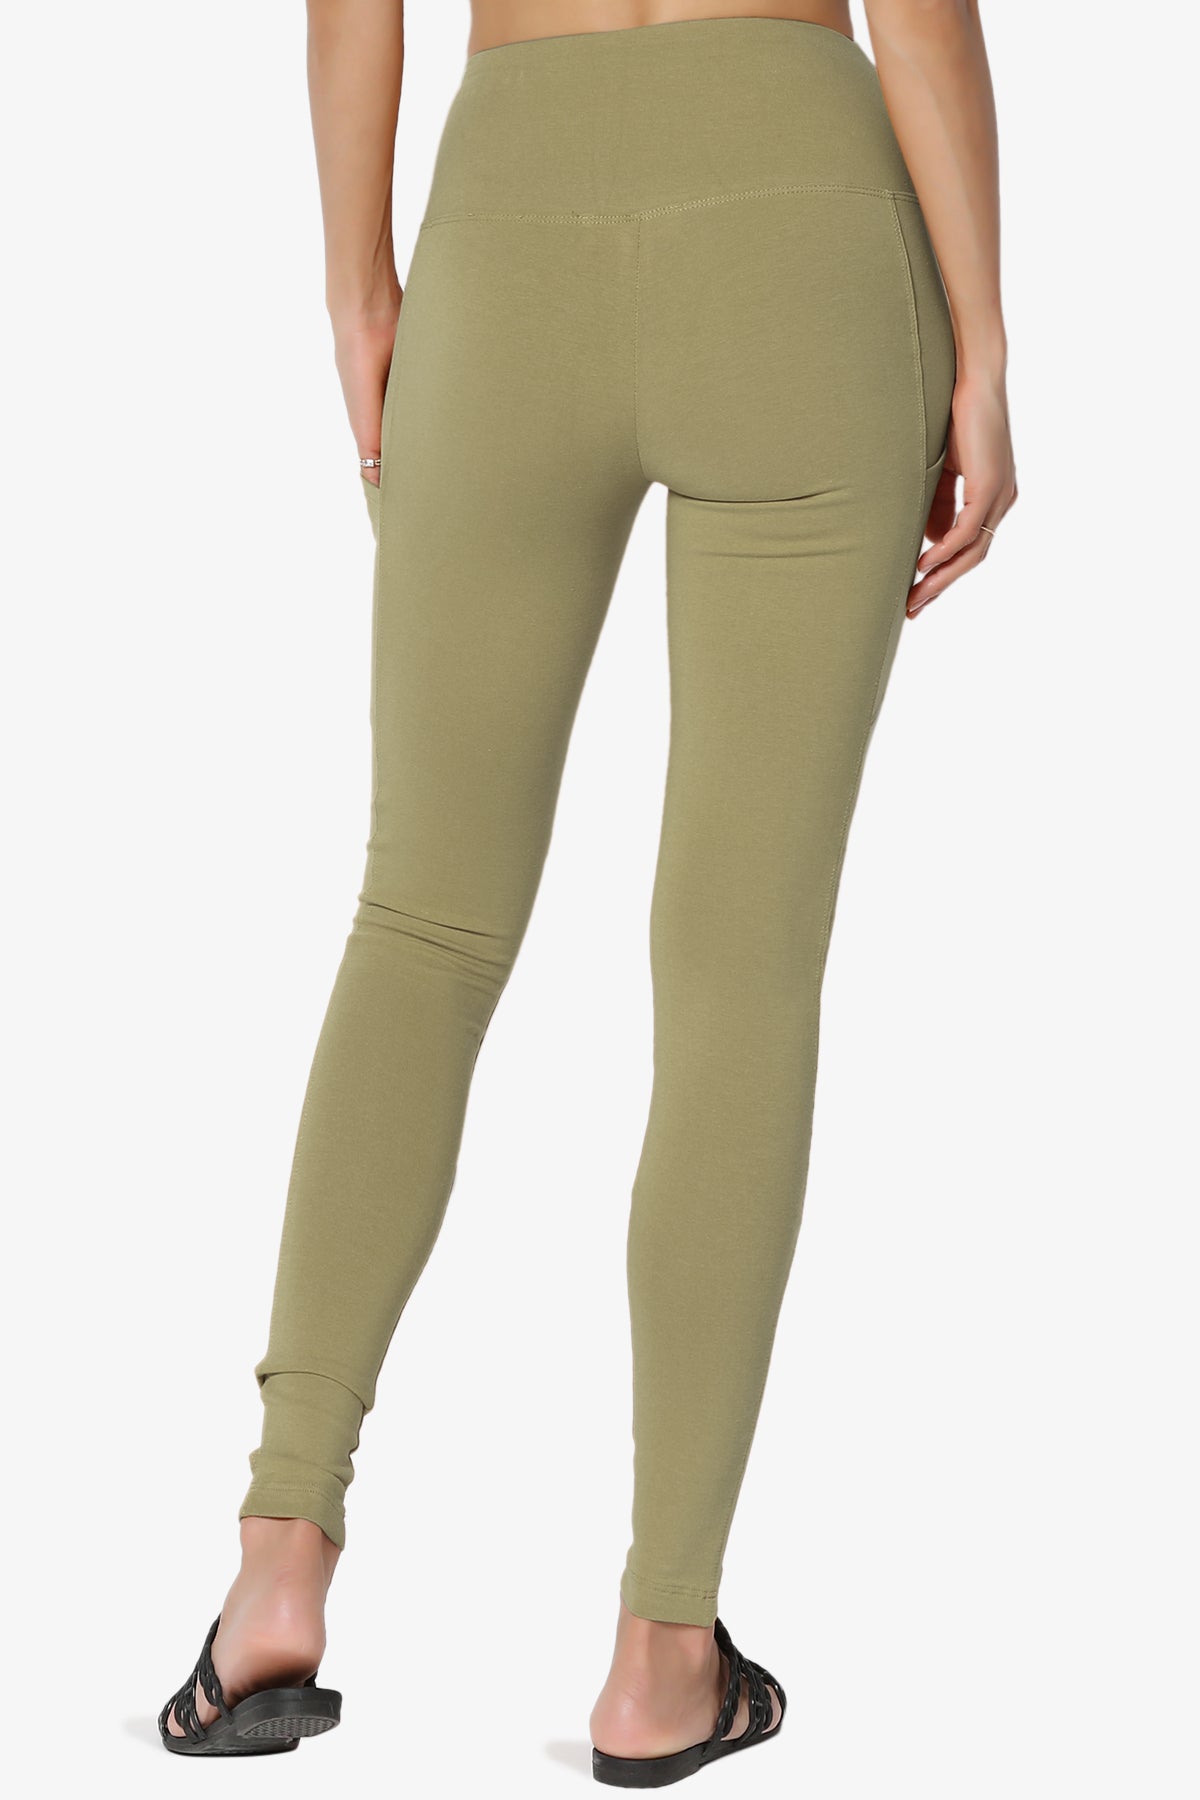 Ansley Luxe Cotton Leggings with Pockets KHAKI GREEN_2